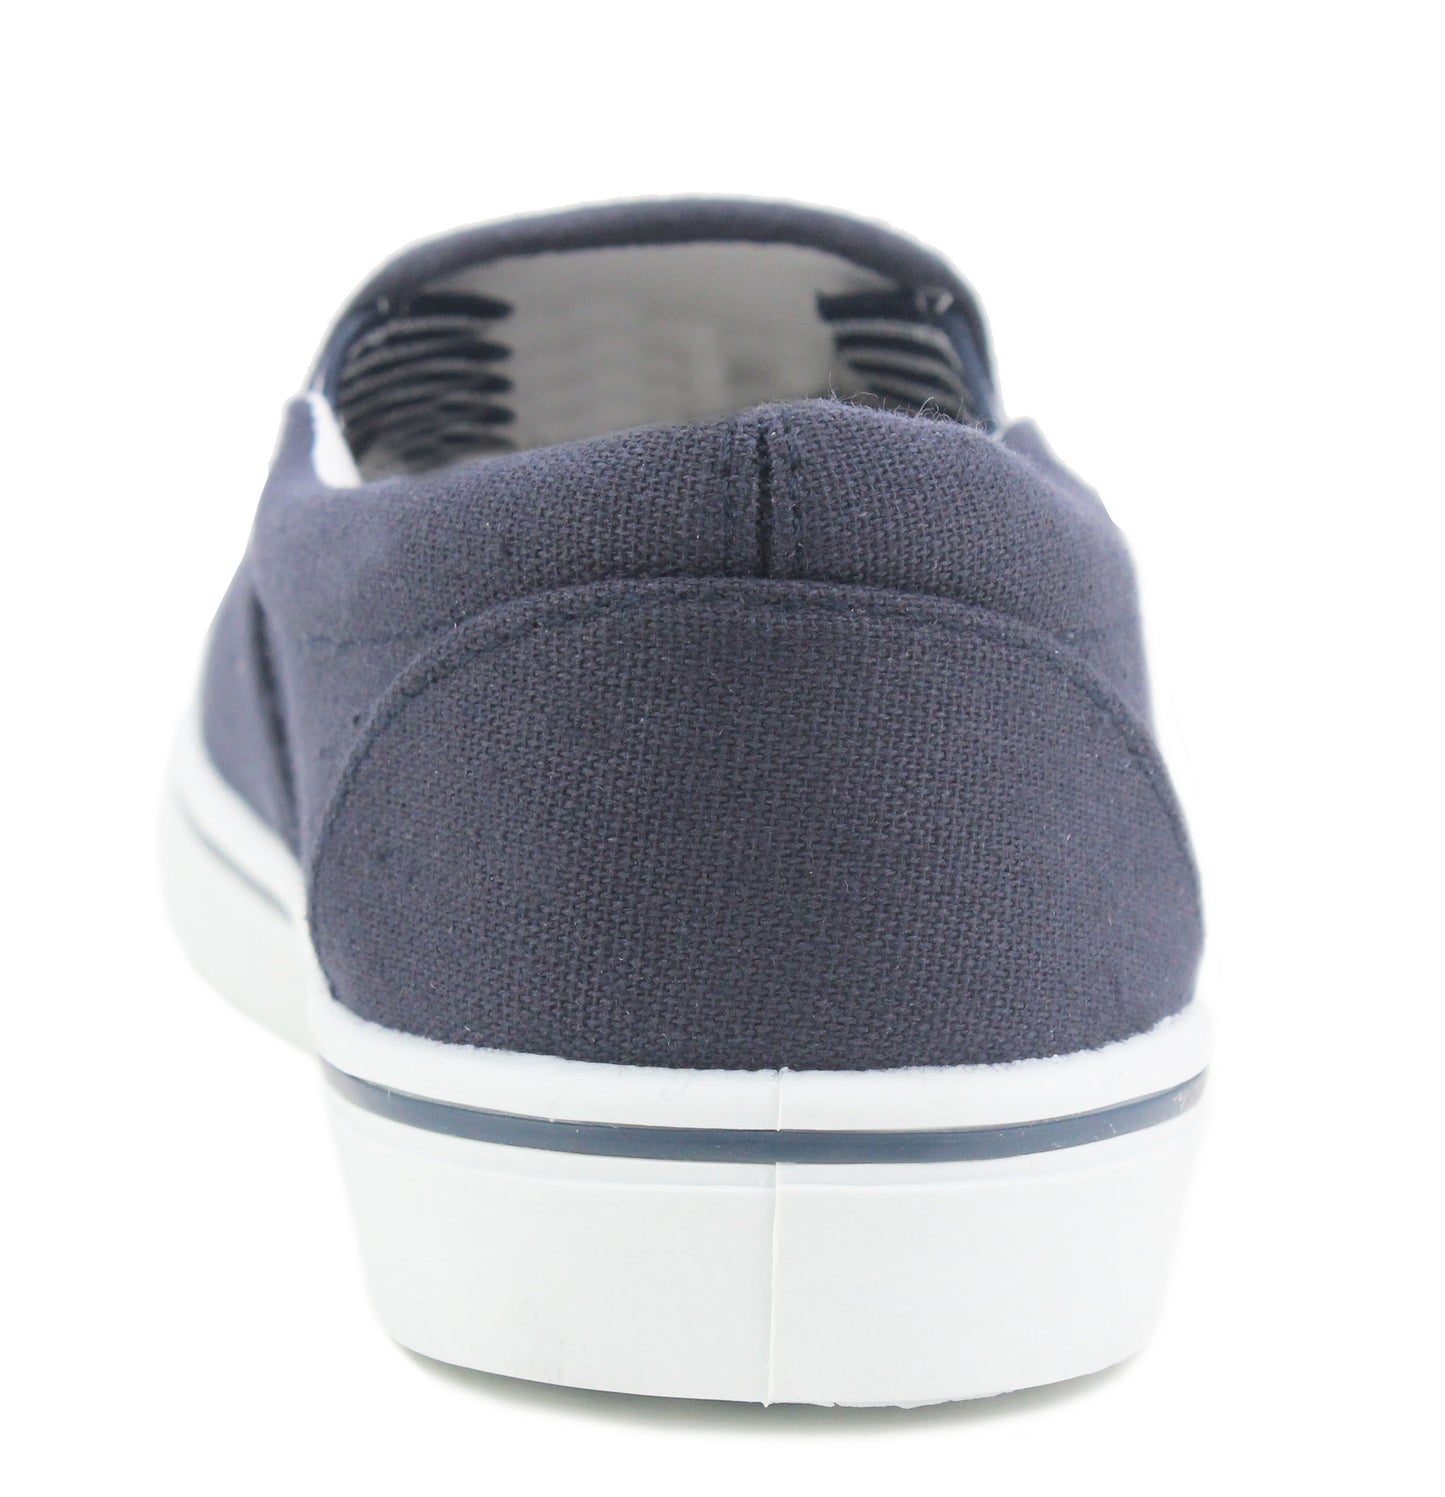 Unisex Slip On Canvas Flat Boat Yachting Deck Plimsoll Espadrilles Casual Pumps Trainers Shoes UK Sizes 4-13